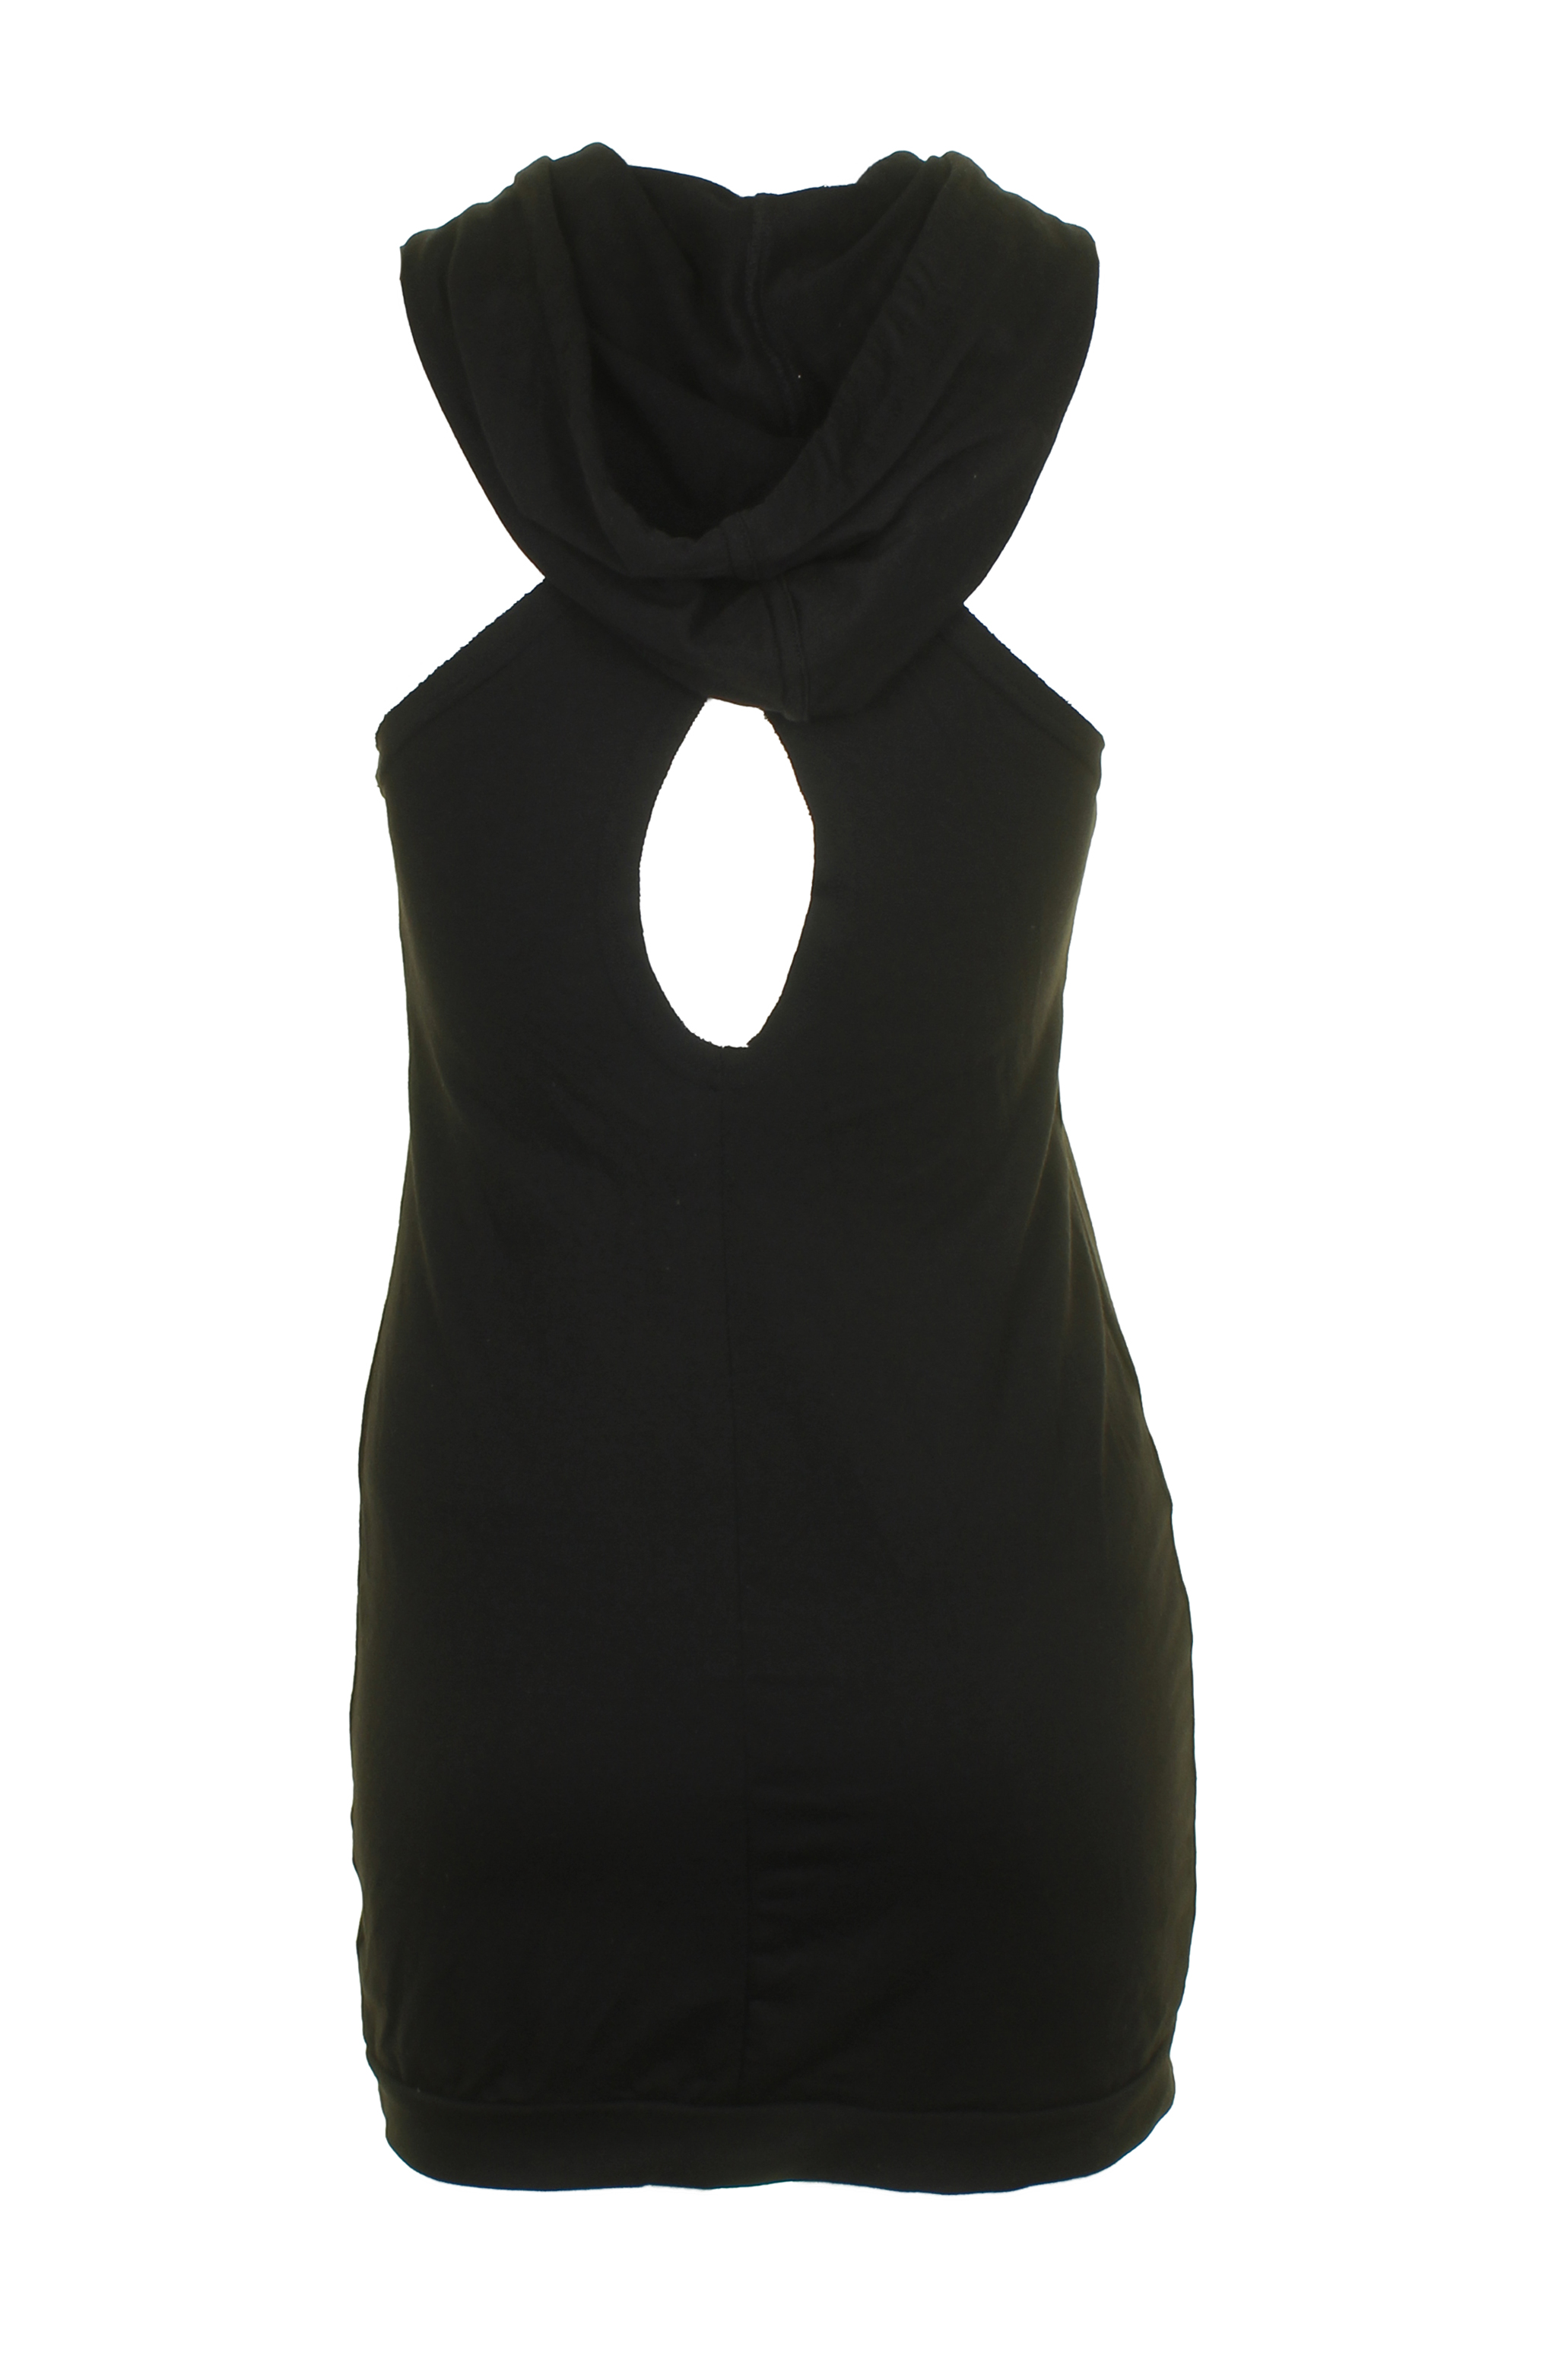 bodycon dress with hoodie